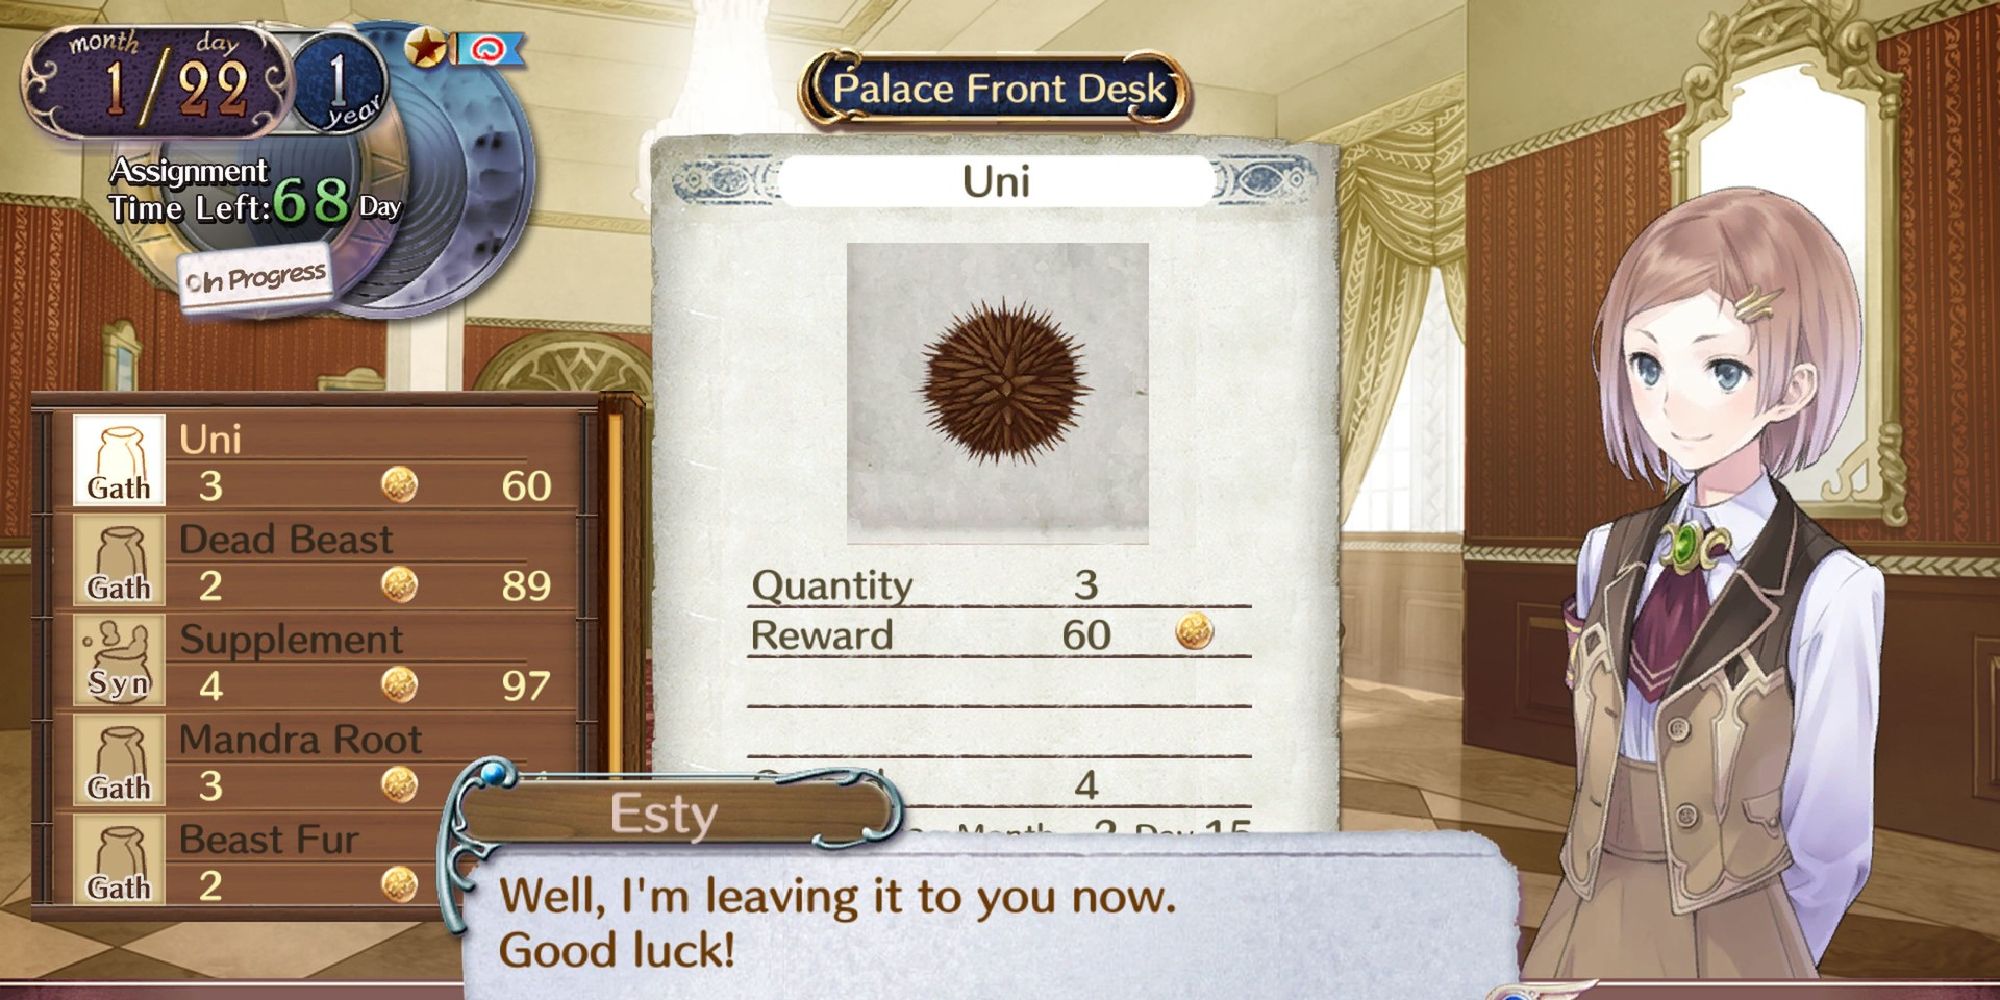 quest selection screen with an uni delivery